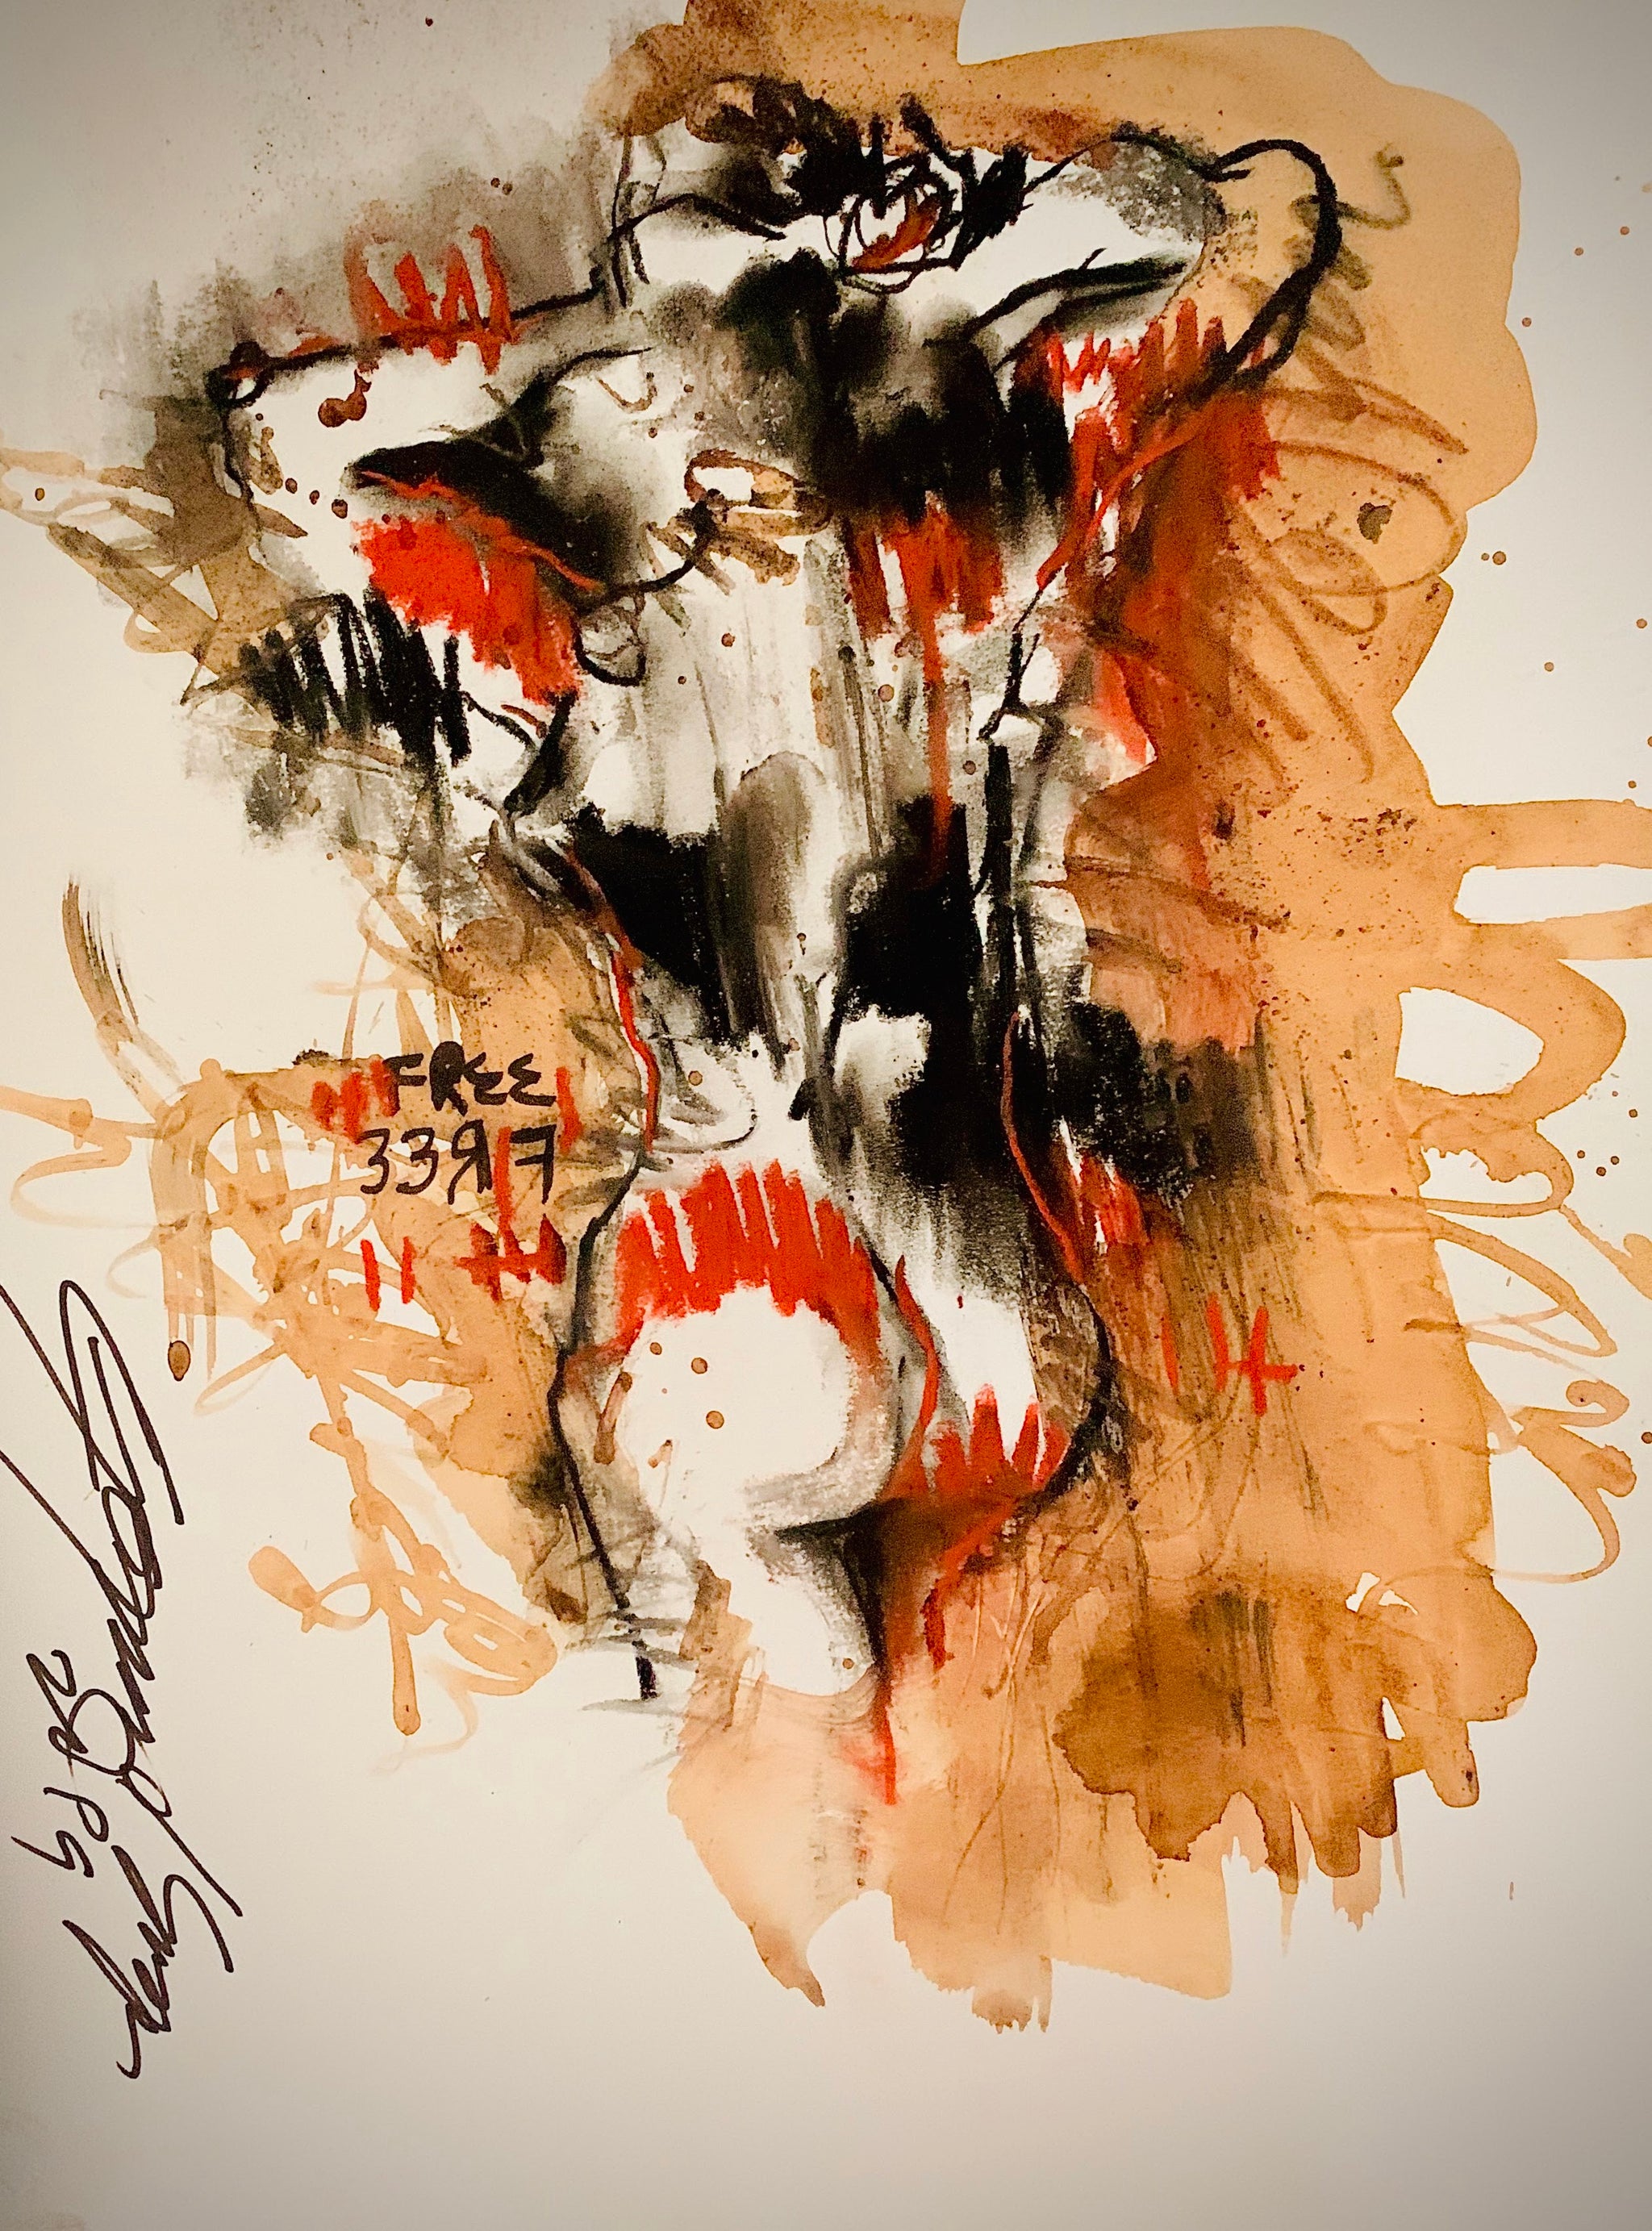 Buy Coffee Series 1 Painting the original Ink, Charcoal and Pastel on Paper artwork by Indian-American artist Gopaal Seyn | RedBlueArts.com